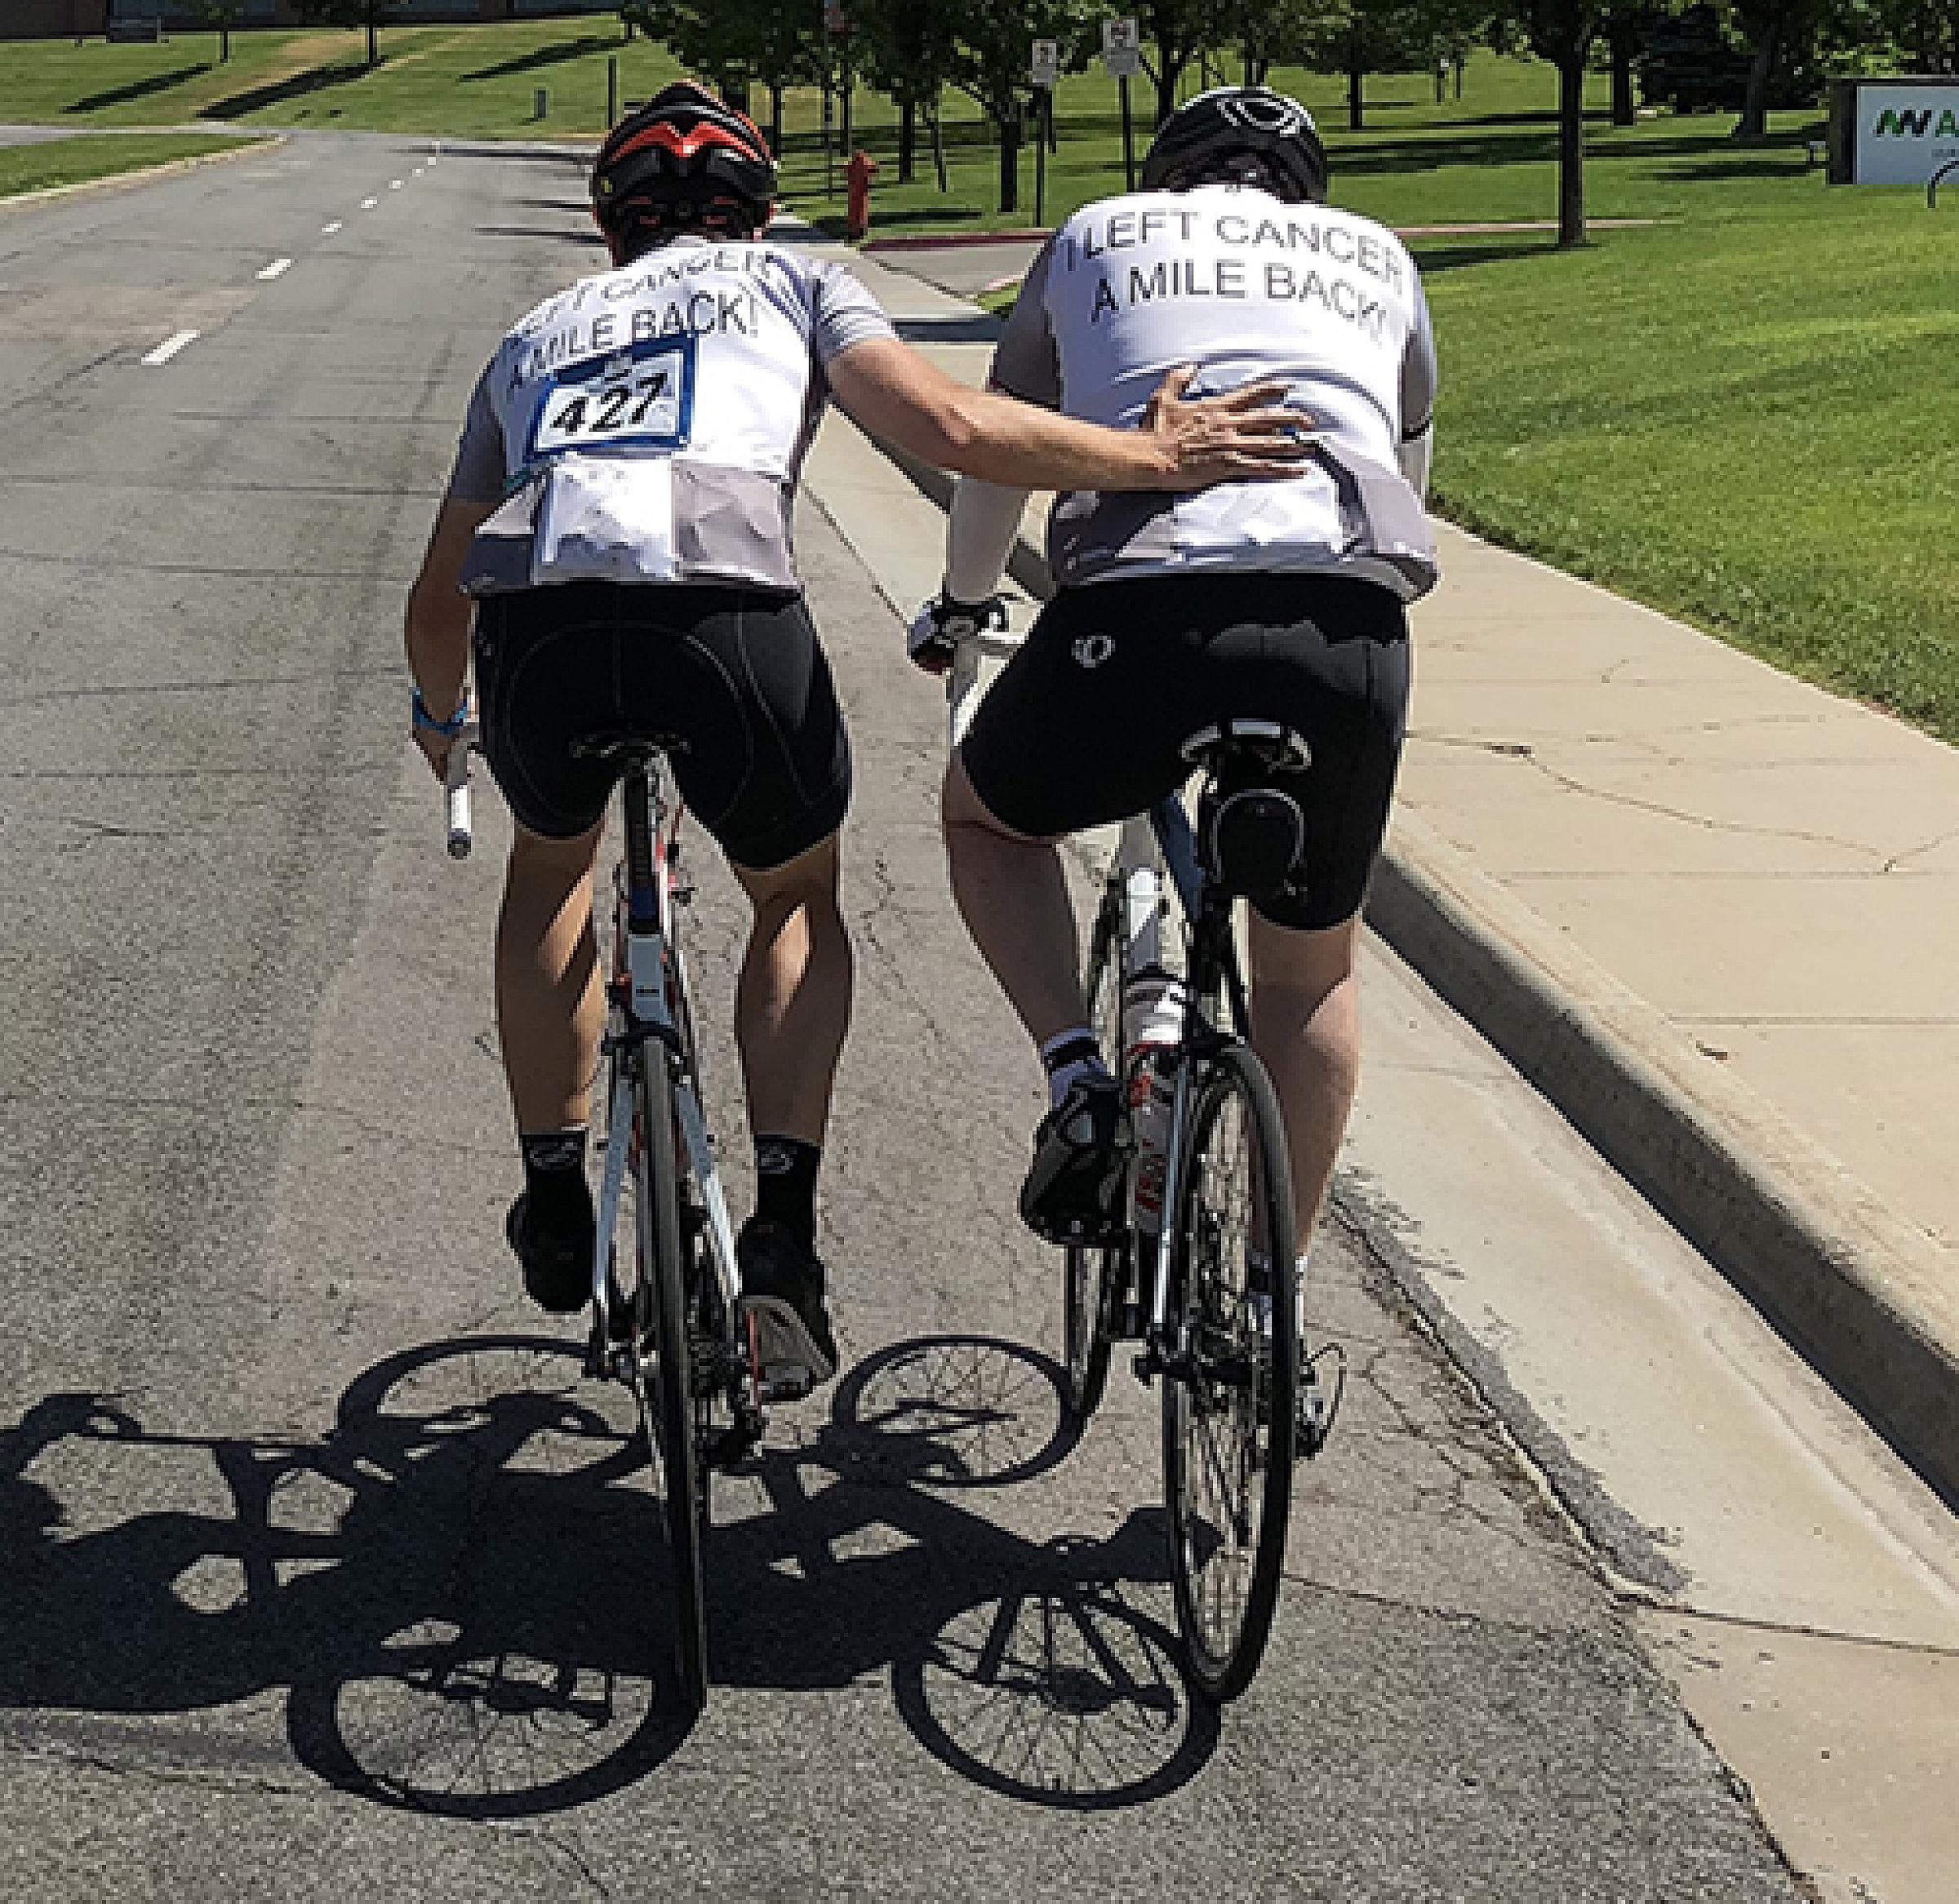 Dan Nelson and teammate road biking together with friend's hand on Dan's back